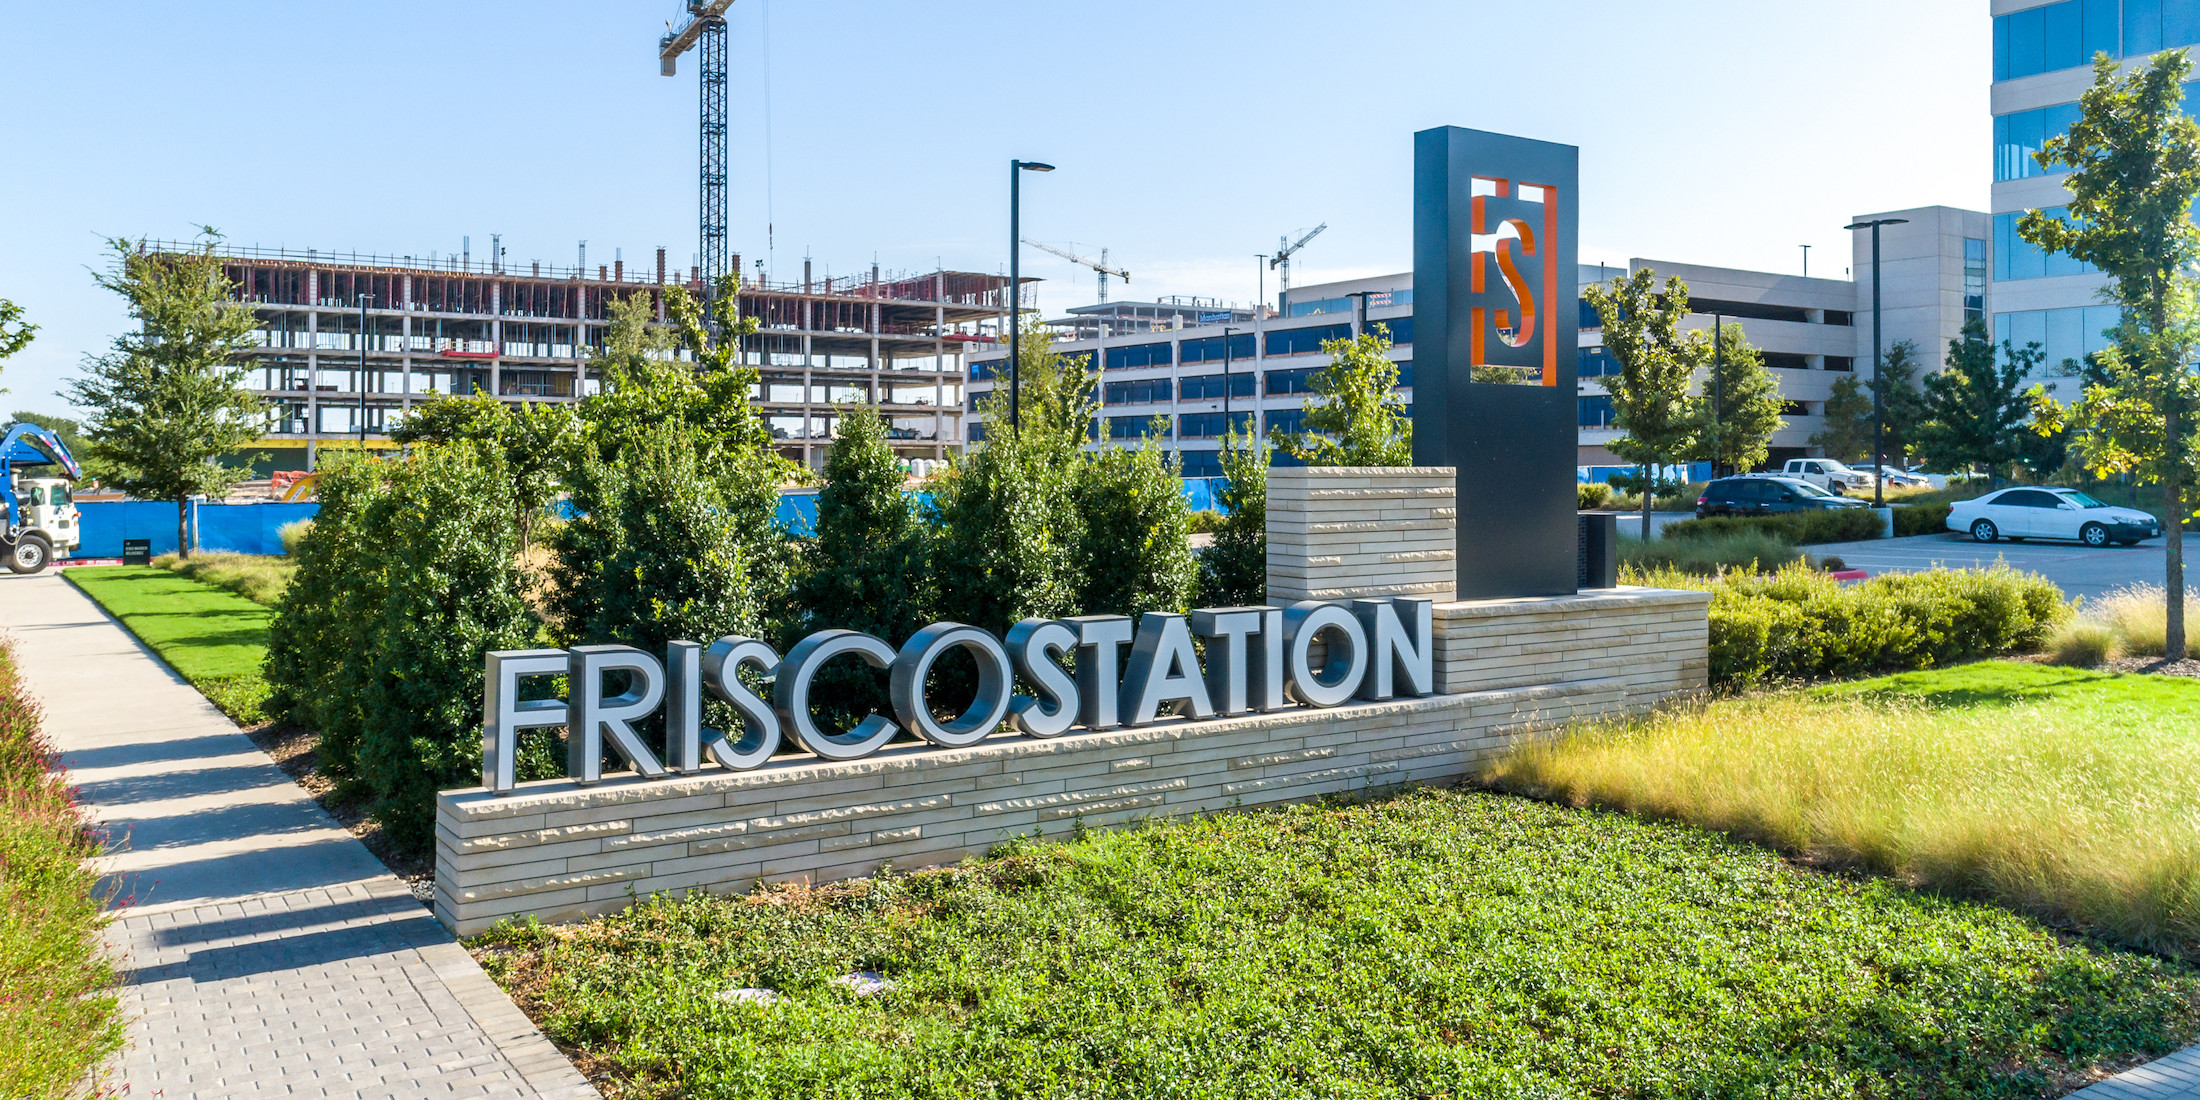 Photo of the Frisco Station sign. There are office buildings under construction in the background.